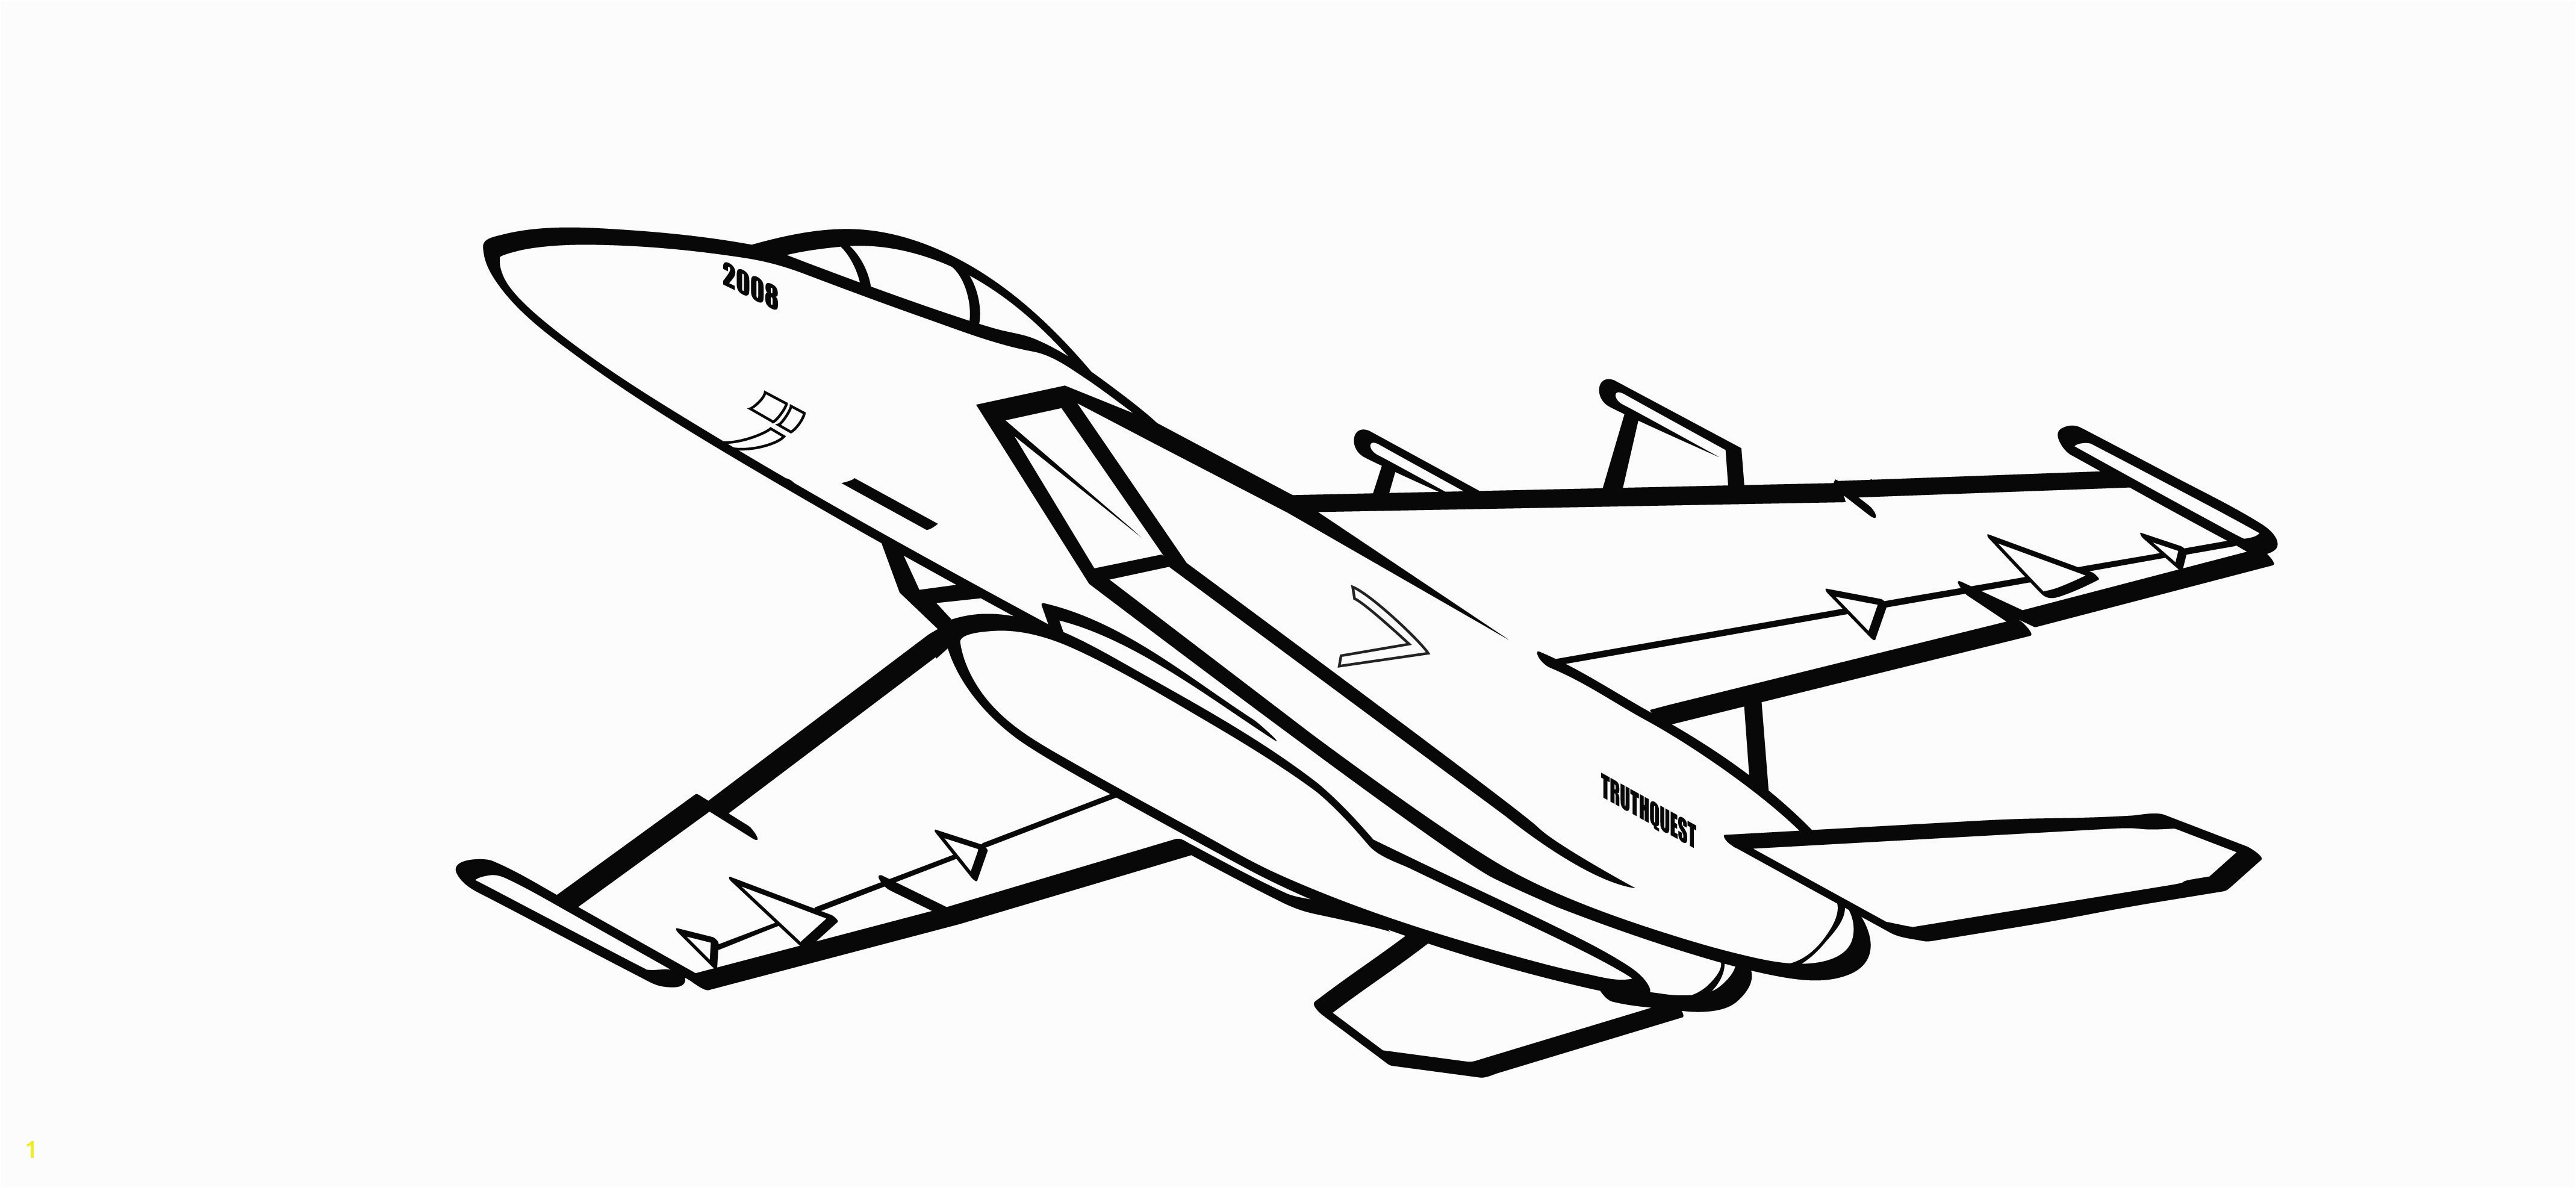 Blue Angels Coloring Pages New Blue Angel Jet Coloring Pages 1189—840 20 Best